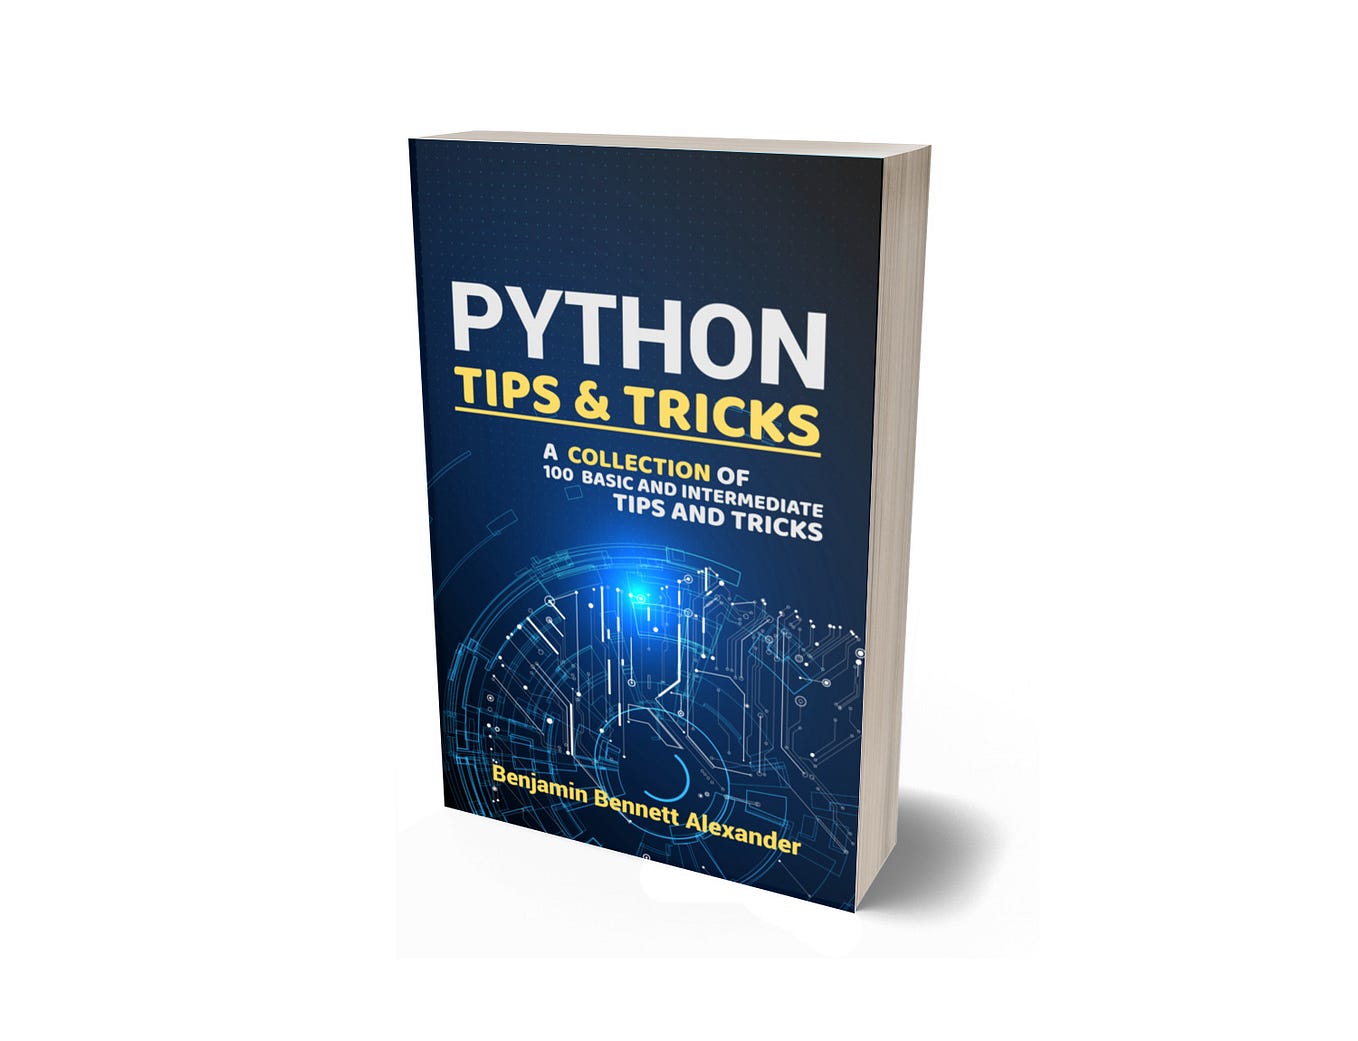 Python Tips and Tricks: A Collection of 100 Basic and Intermediate Tips and Tricks